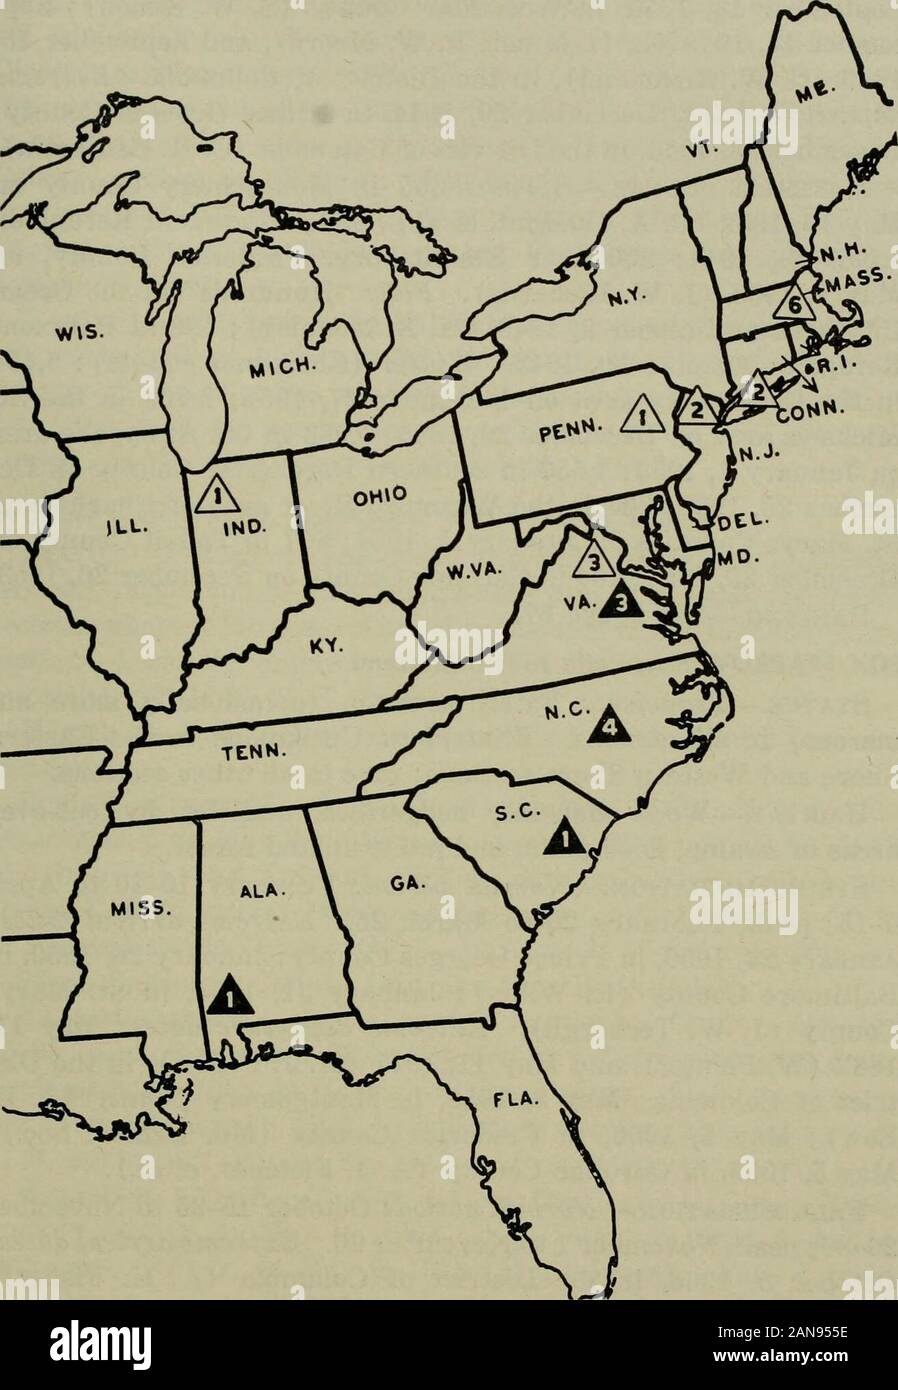 North American fauna . e Georges County during June and July 1936 (B. Carow),and on June 26, 1947; and in Calvert County on June 28, 1955(K. Stecher). Habitat.—Wood margins, hedgerows, and brushy cut-overareas of swamp and flood-plain forests and rich moist forests onthe upland. Spring migration.—Normal period: March 20-30 to May20-30; peak, April 15 to May 10. Extreme arrival dates: March5, 1949, in Baltimore County (I. E. Hampe) ; March 11, 1903, inthe District of Columbia (W. W. Cooke) ; March 16, 1945, inPrince Georges County; March 17, 1918, in Anne Arundel County(F. Harper). Extreme depa Stock Photo